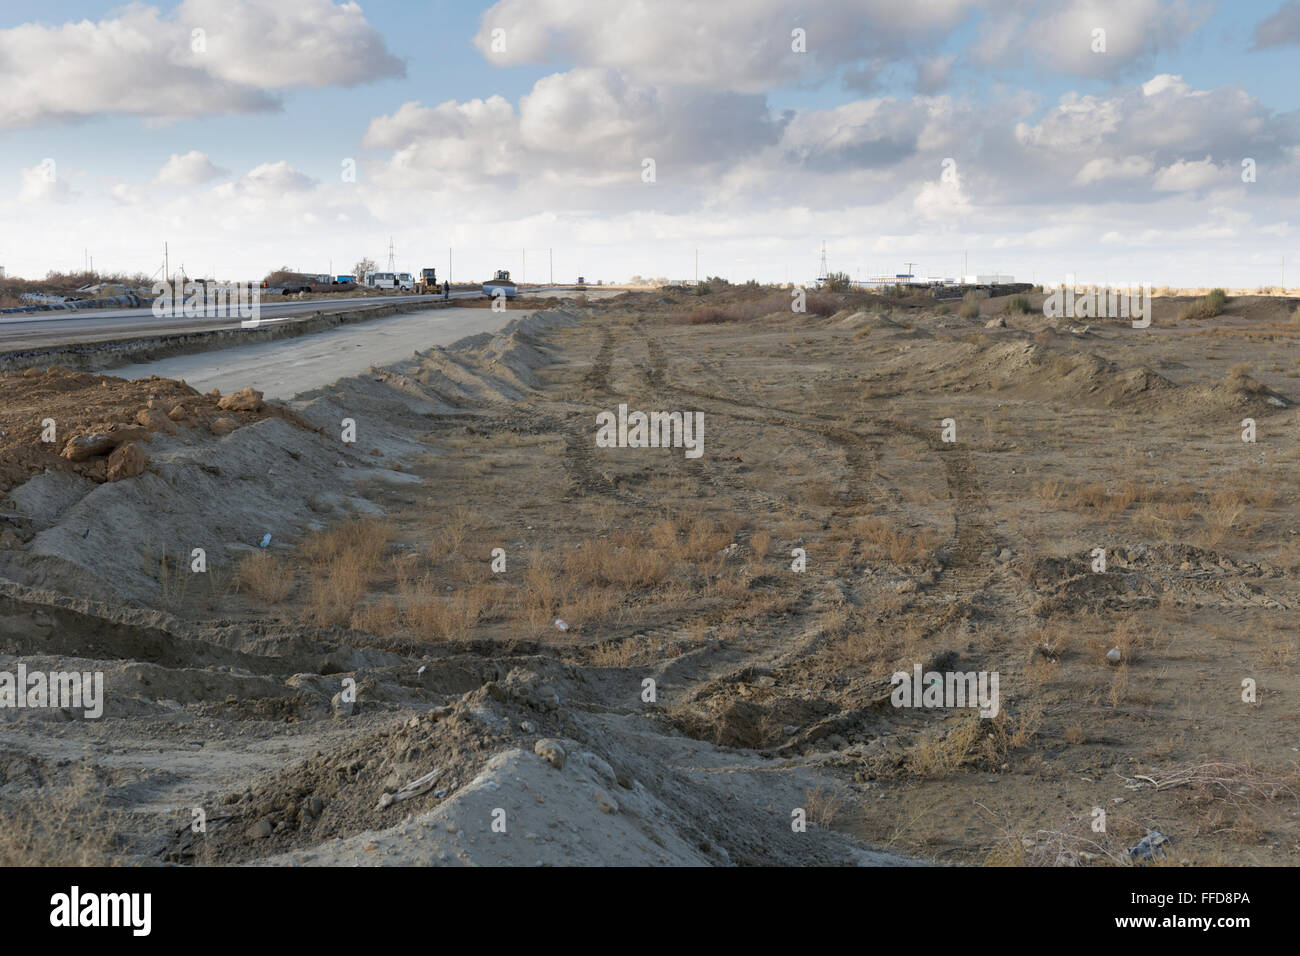 Surfacing work continues on the Great Silk Road Stock Photo